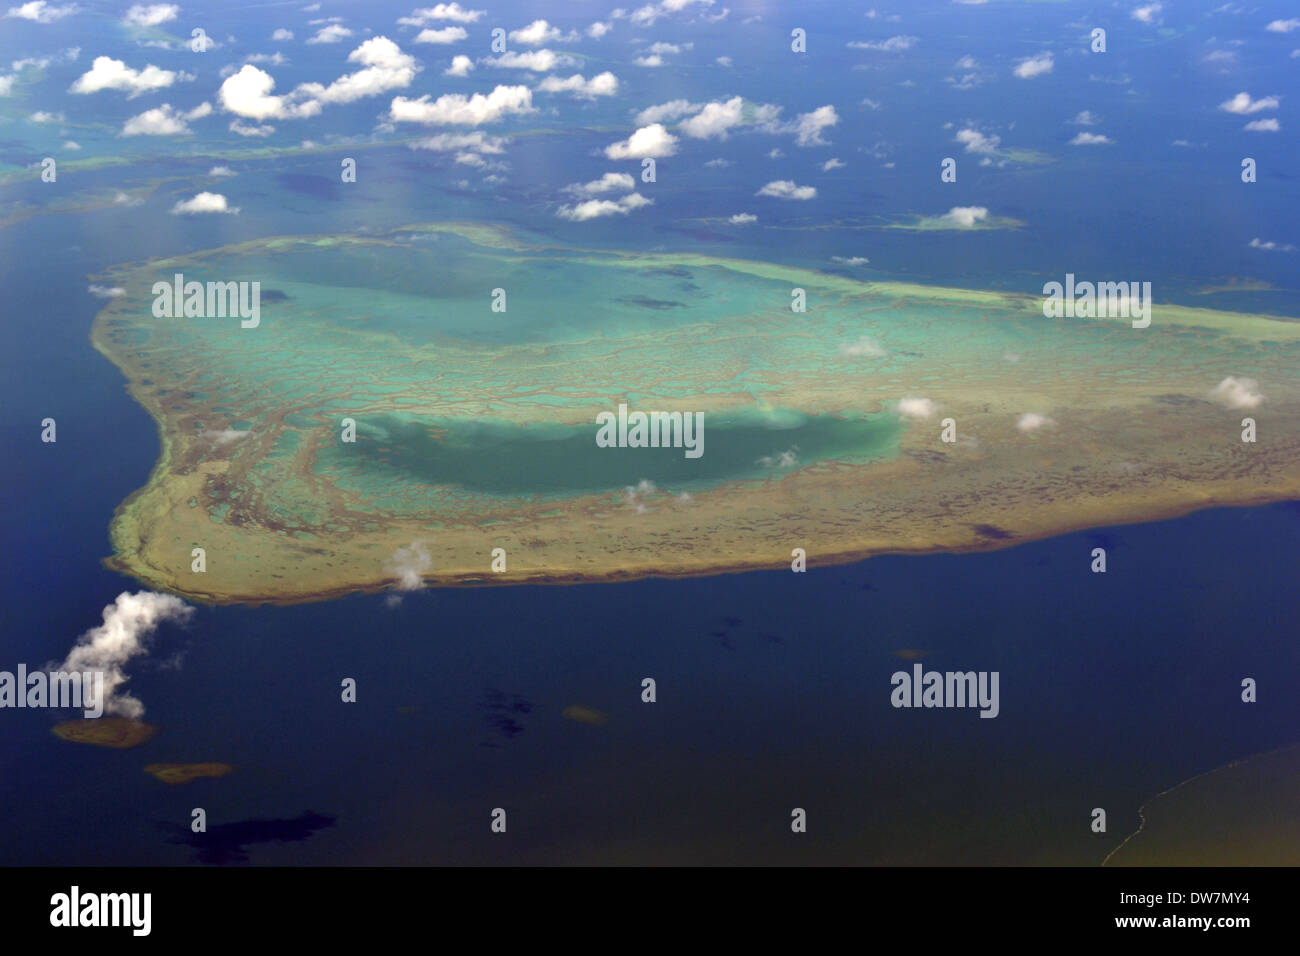 Aerial view of atoll to the West of Viti Levu, Fiji, South Pacific Stock Photo